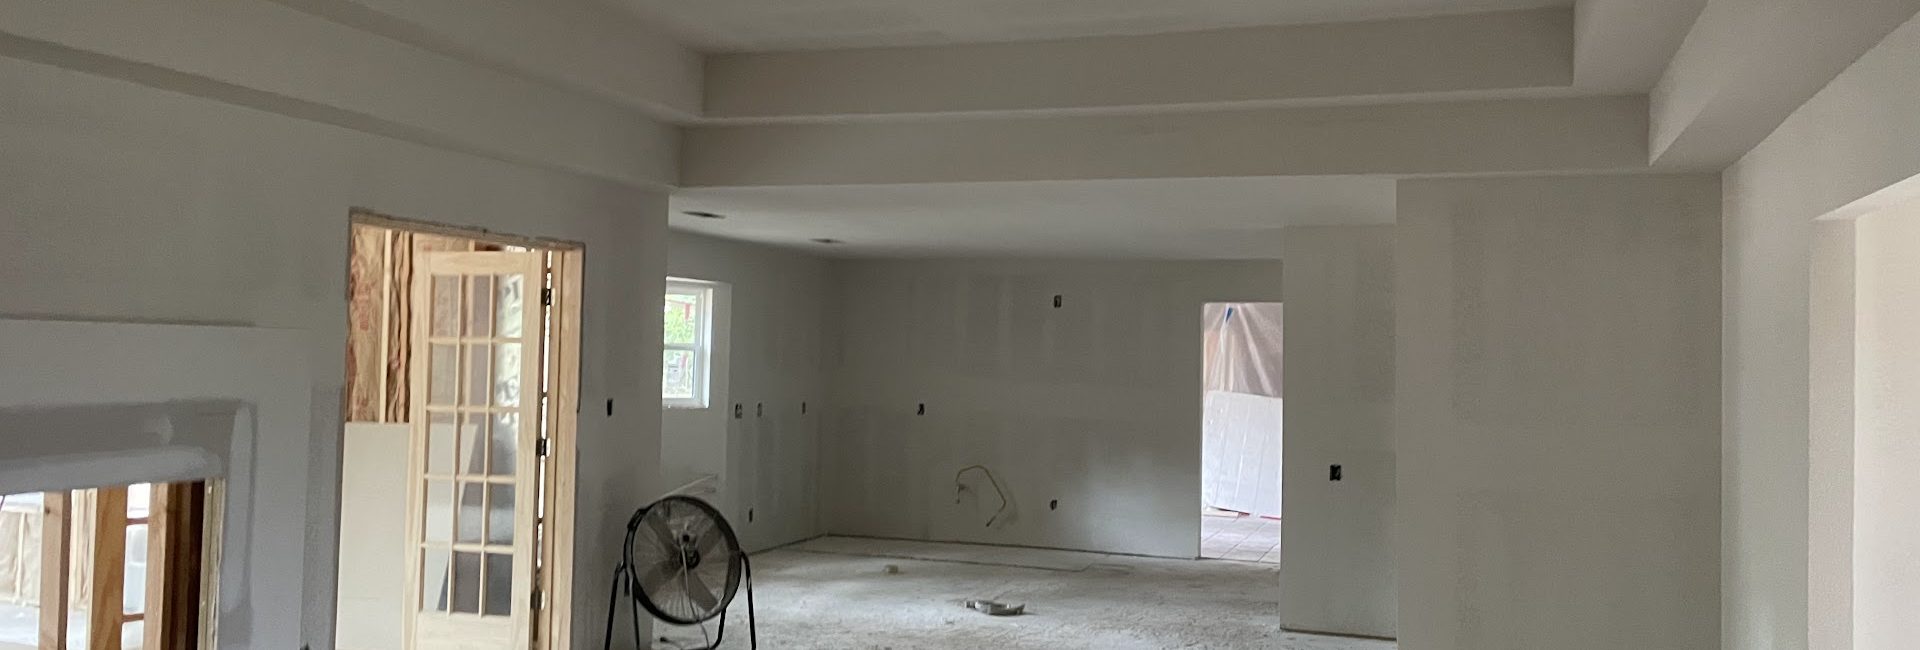 Fort Worth Drywall Solutions 2